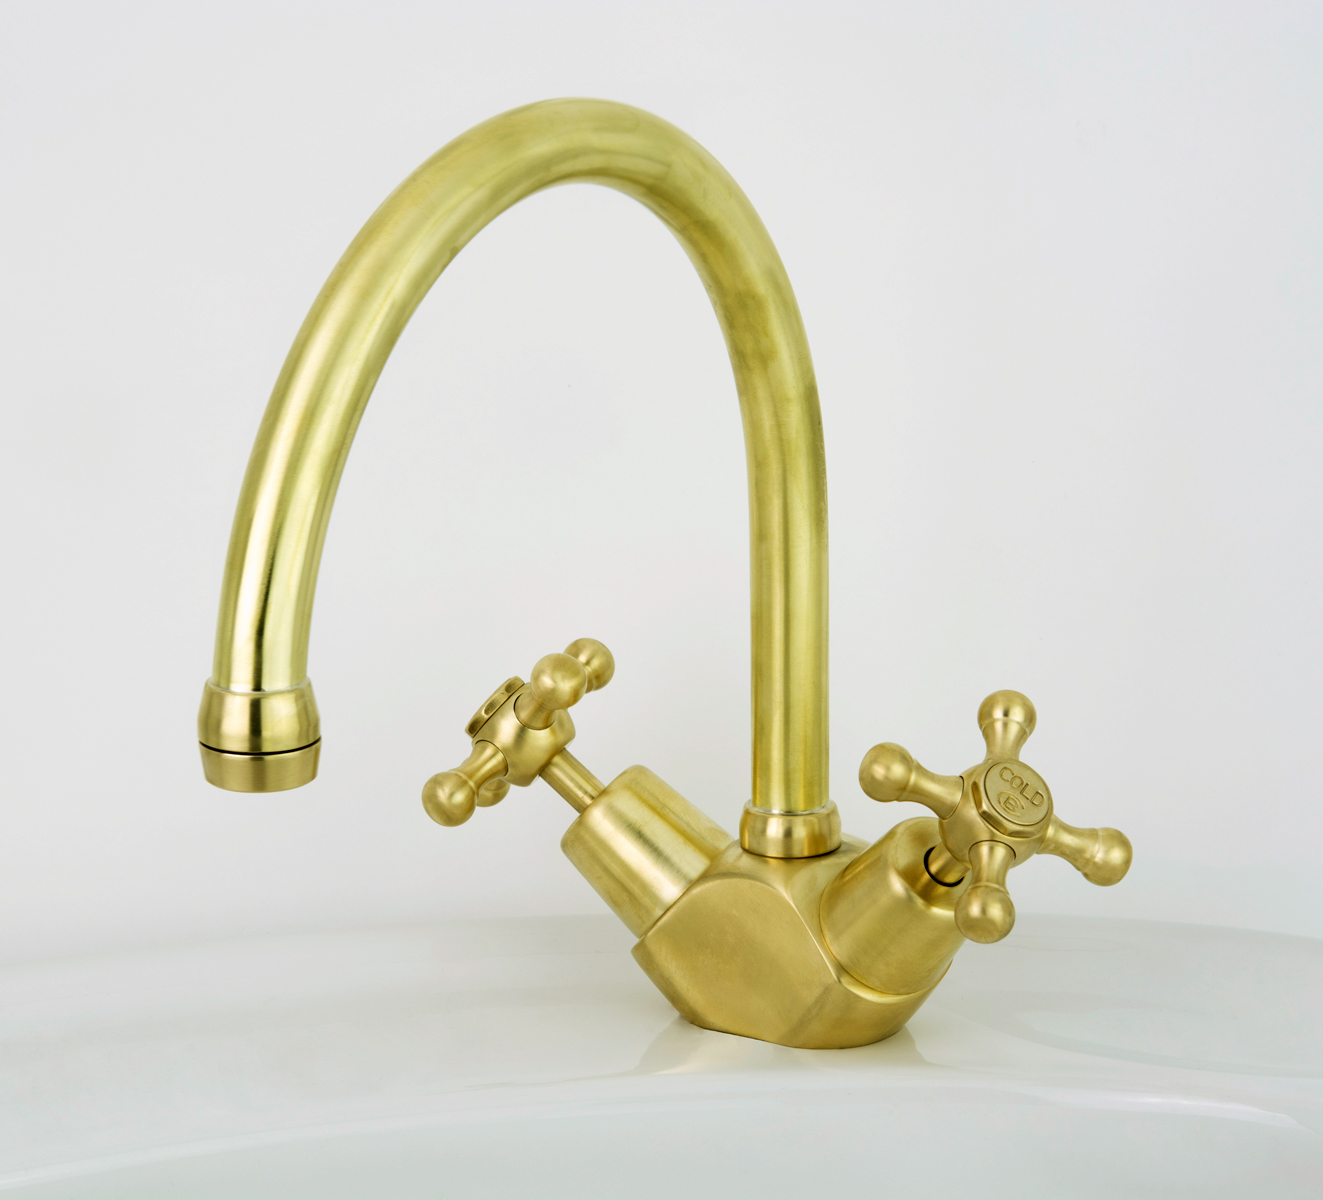 Roulette Sink Duo Mixer with Swivel Gooseneck Outlet in Lea Wheeled Brass with Engraved Button Upgrade